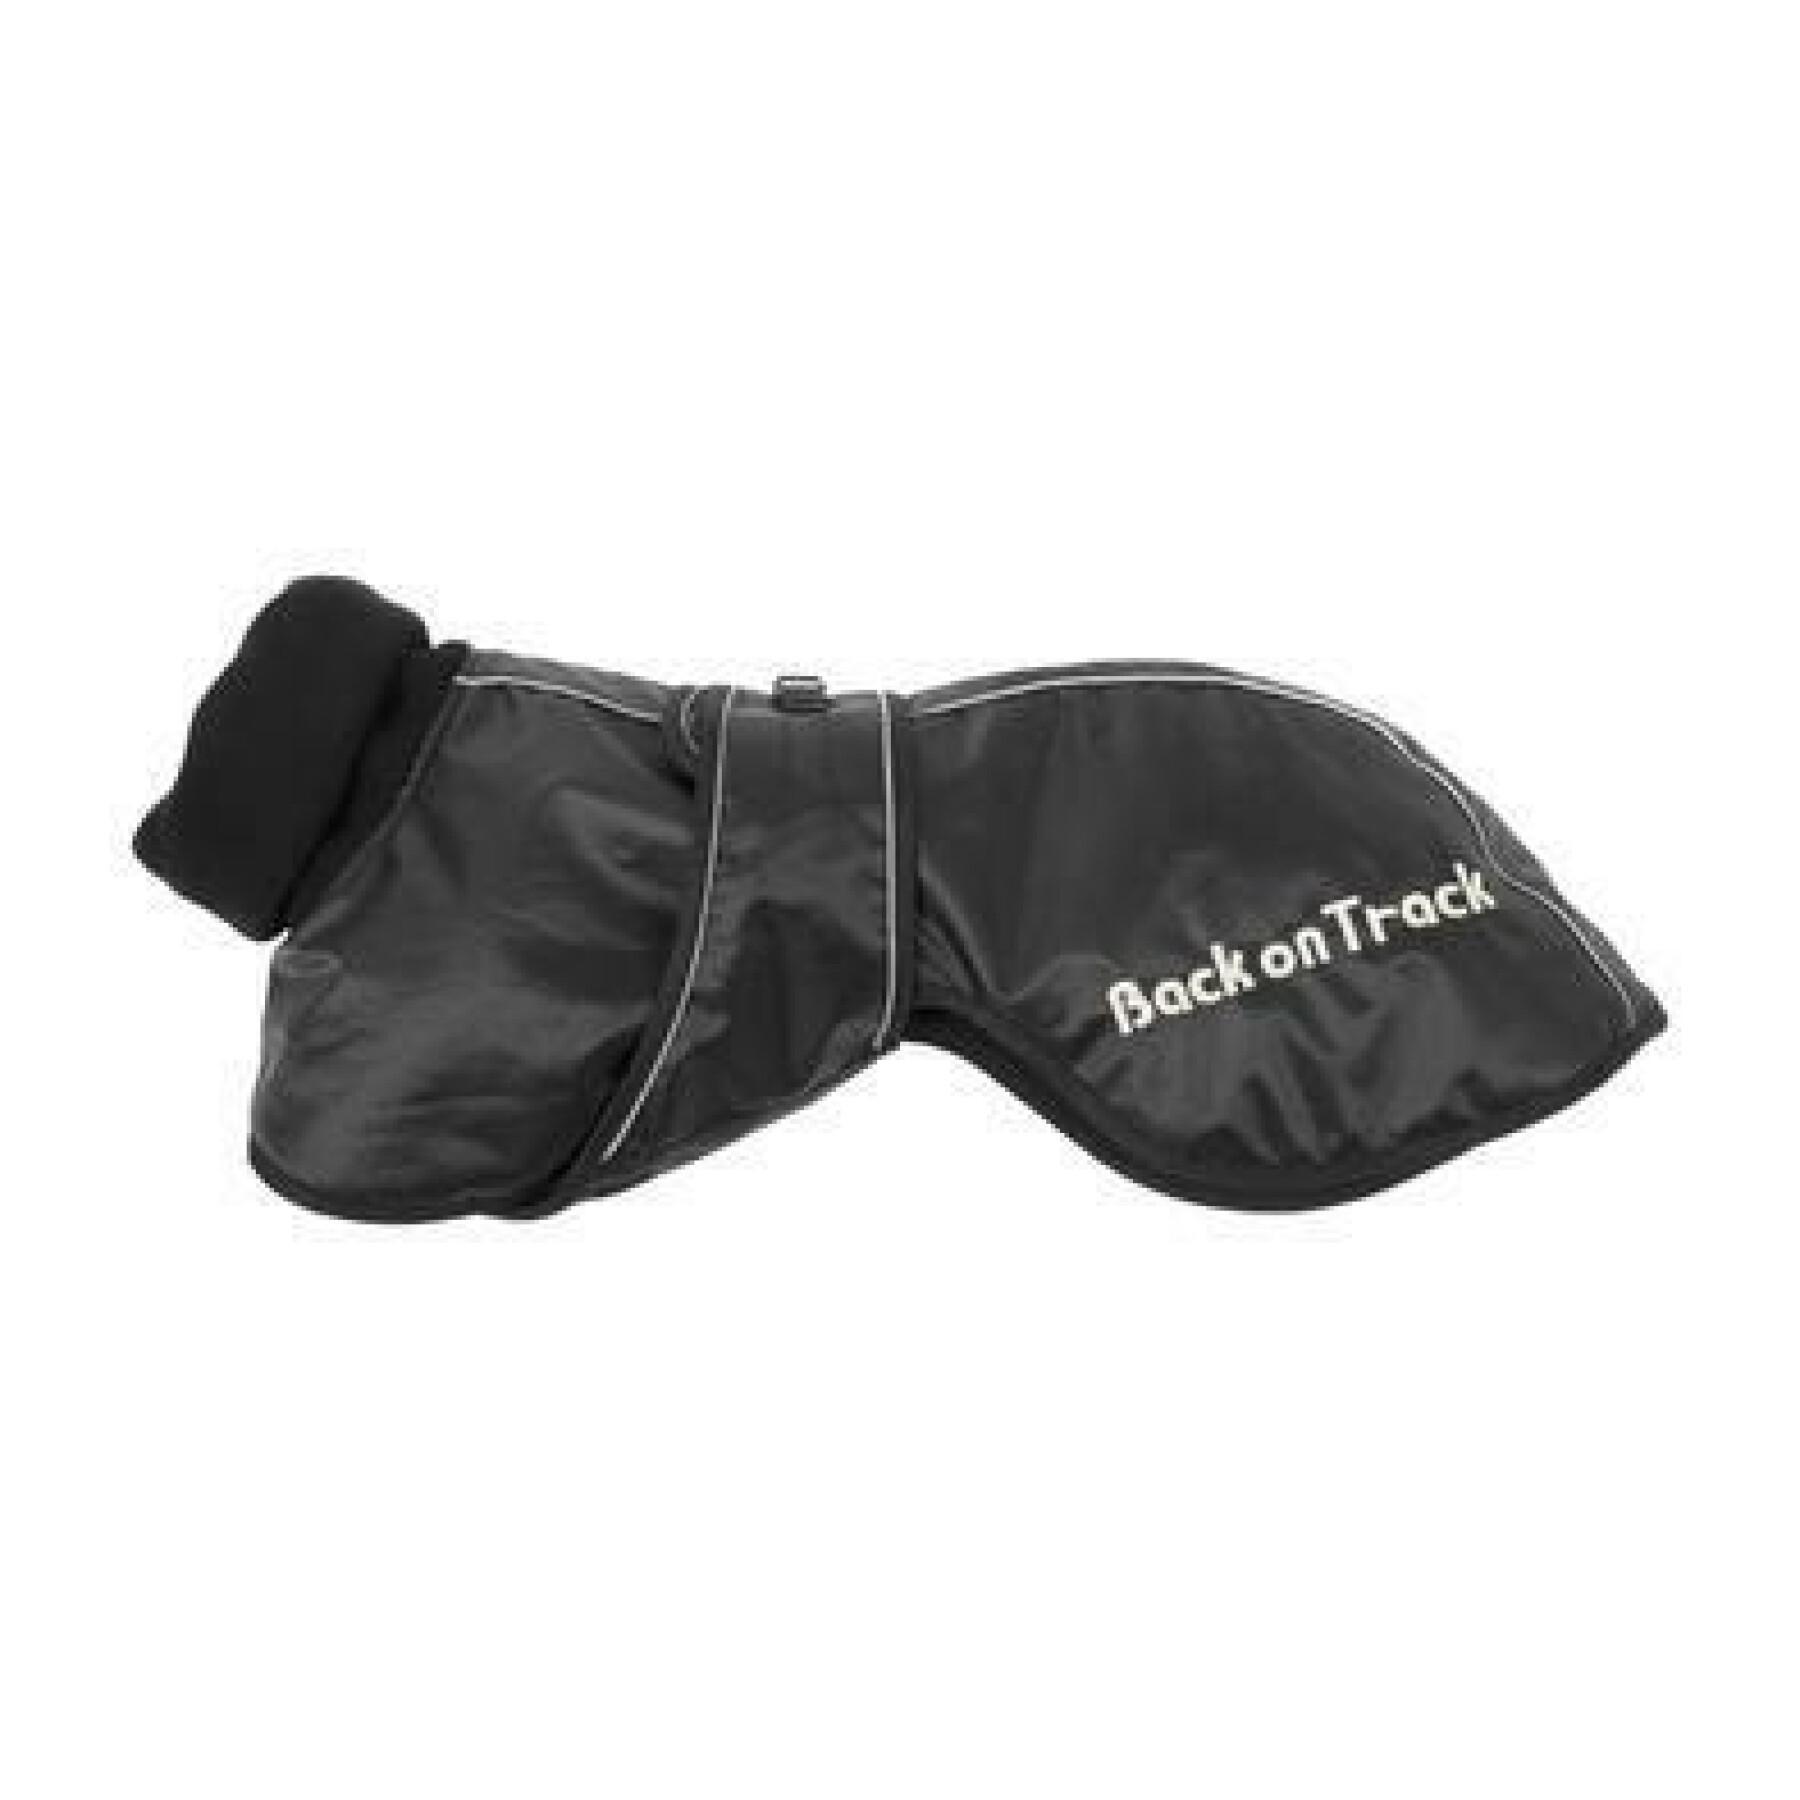 Cappottino per cani Back on Track whippet 40 cm